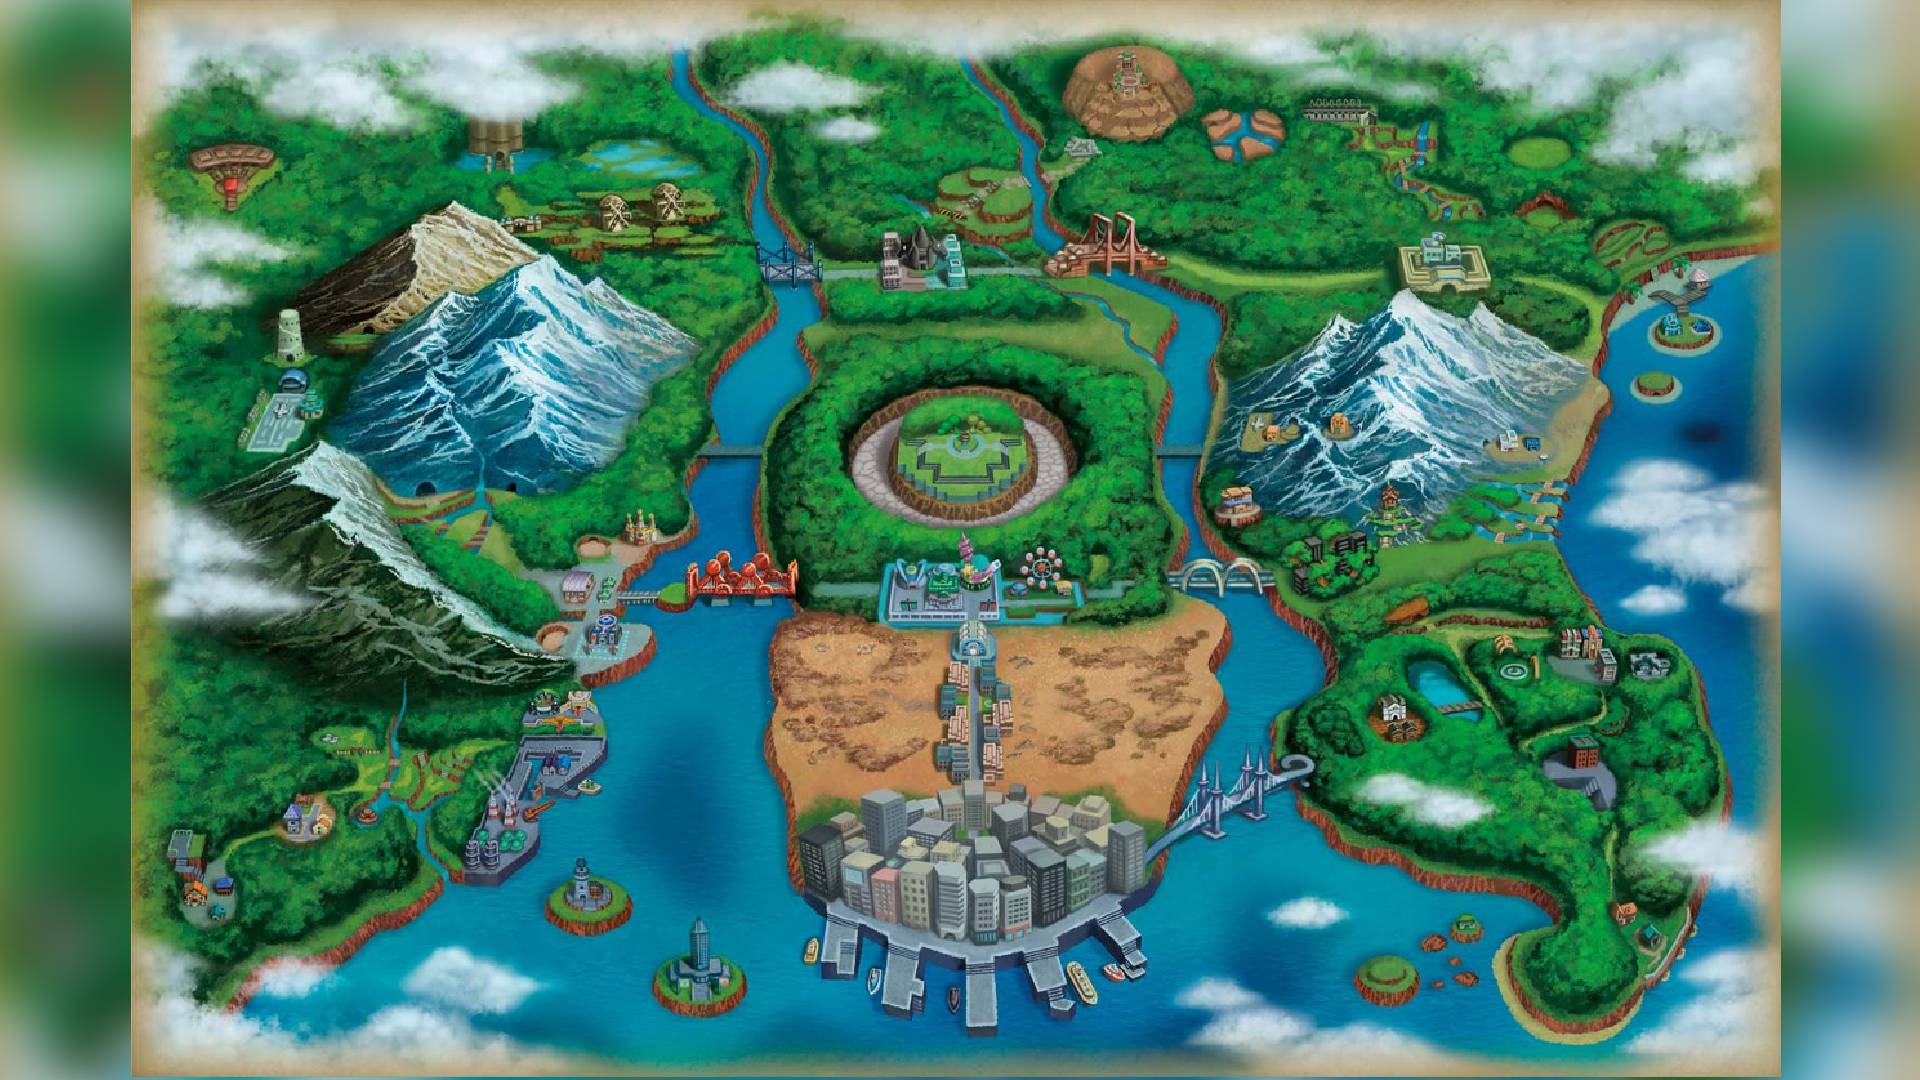 UnovaRPG - New Alola Forms available on maps! they will appear randomly on  any map, so you can start getting the first 18 Alola Pokemon available from  now on! Visit your account --->>